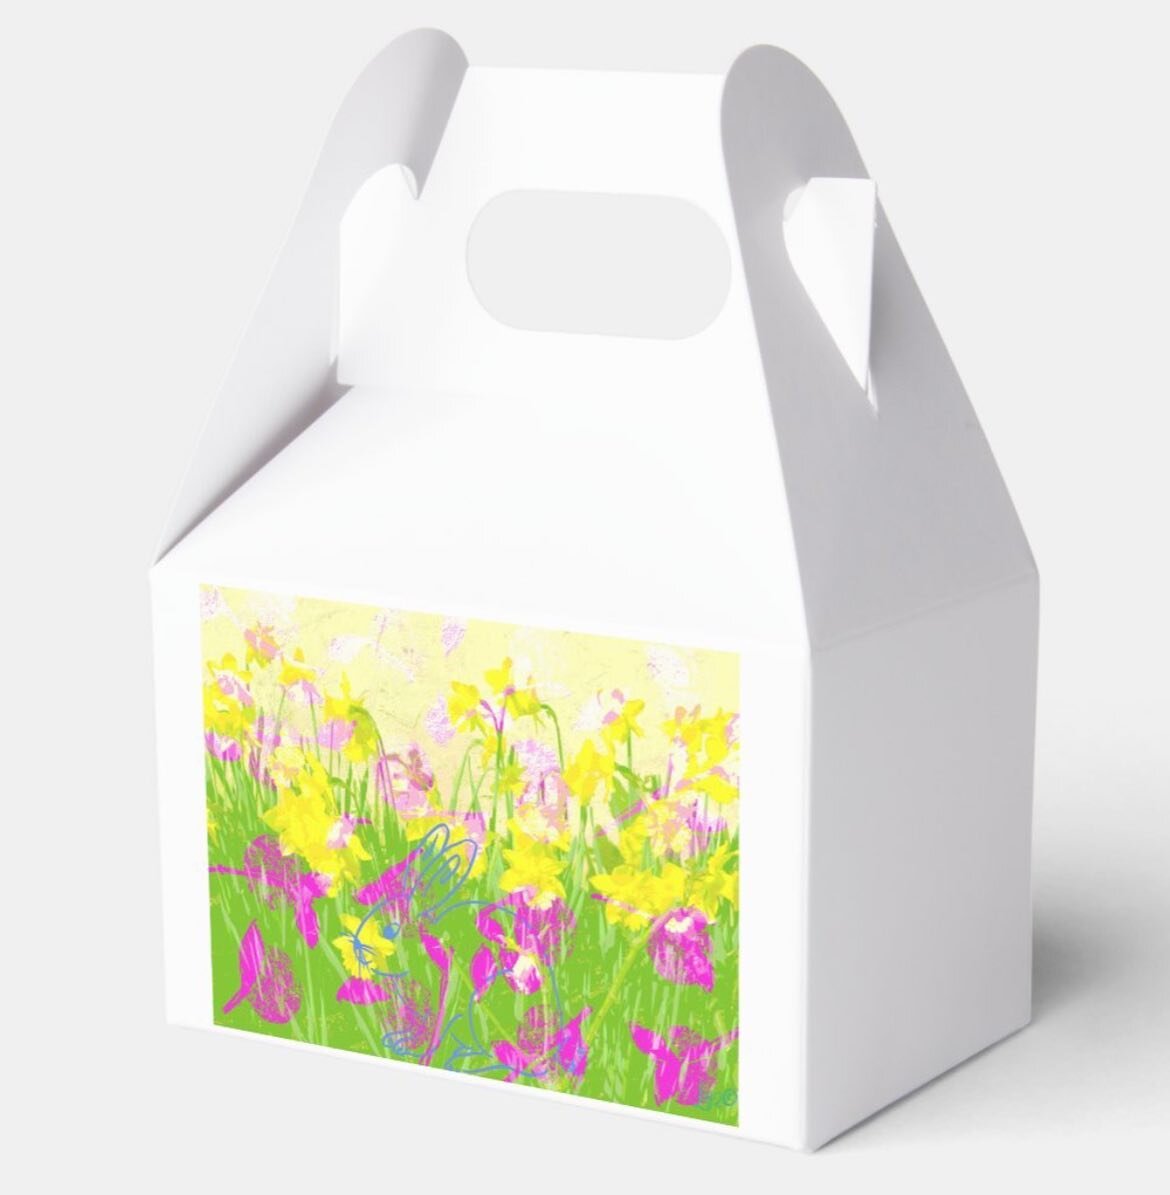 Where is bunny? Hiding in the daffodils!
Spring Fever link in bio to custom order.
#bunnyrabbit 
#springgifts 
#easterbunny 
#giftboxes 
#easterbunnycookies
#easterdecor 
#rabbitcute